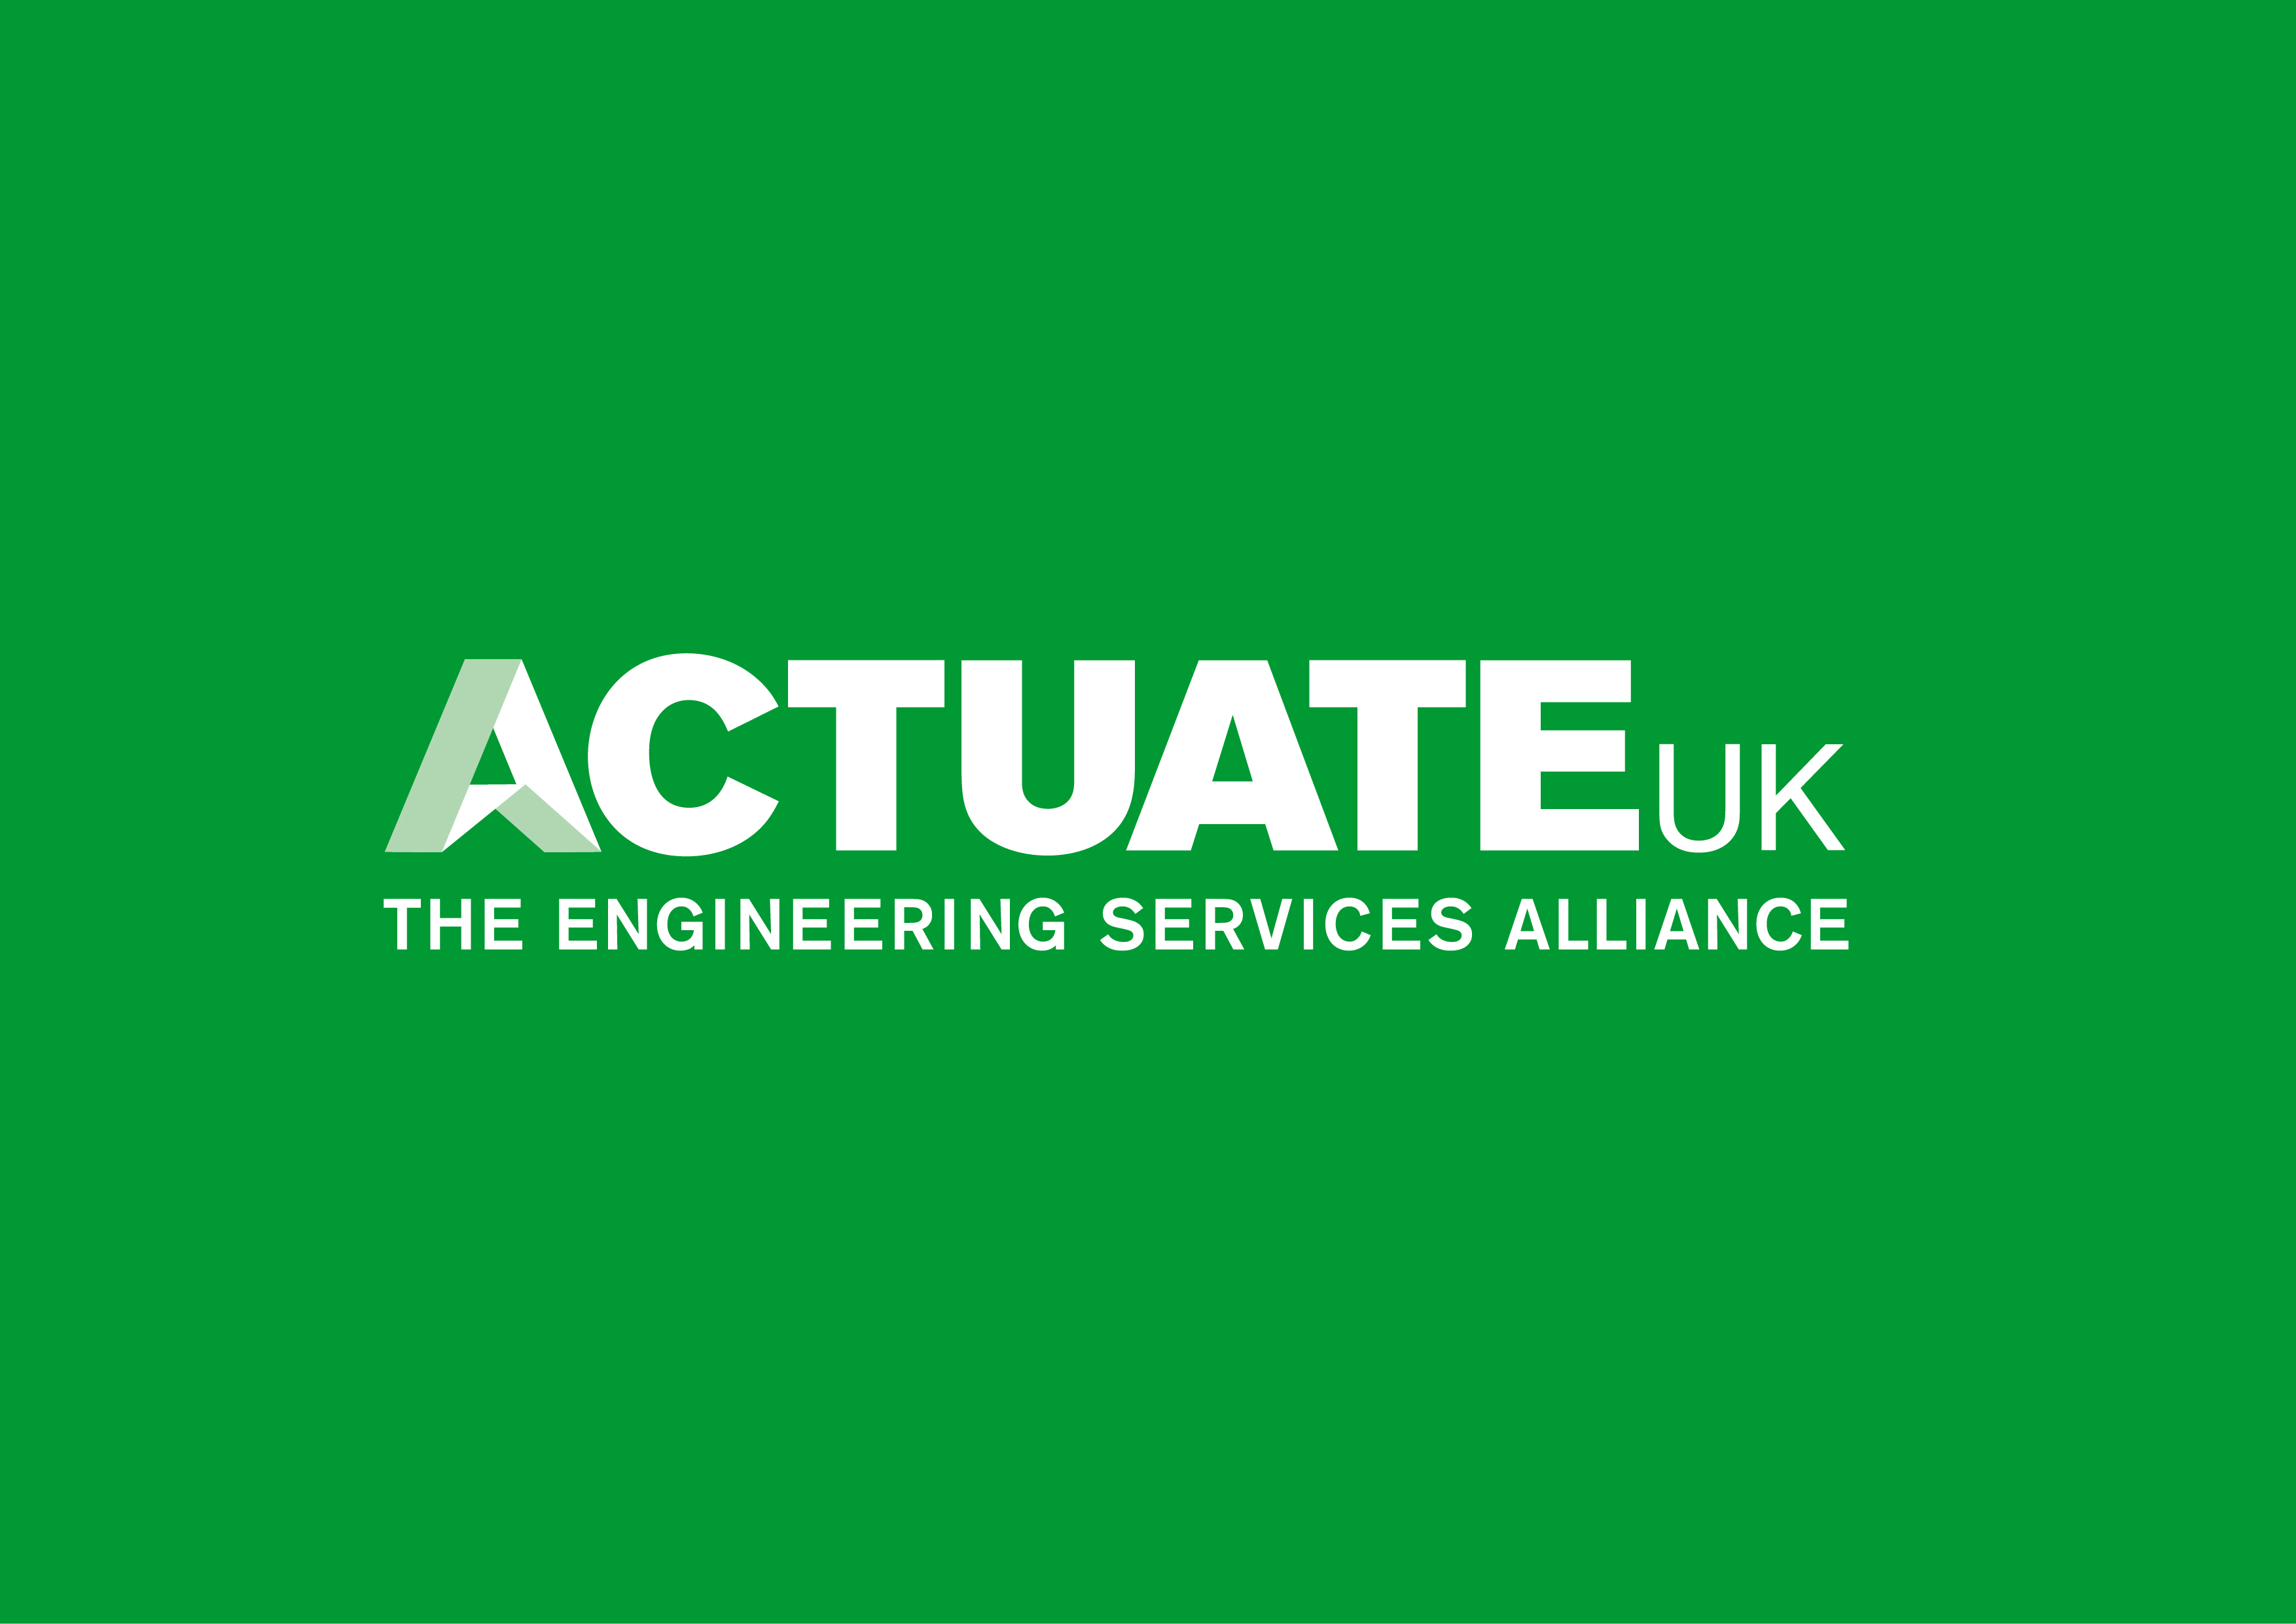 Re-watch the launch of Actuate UK